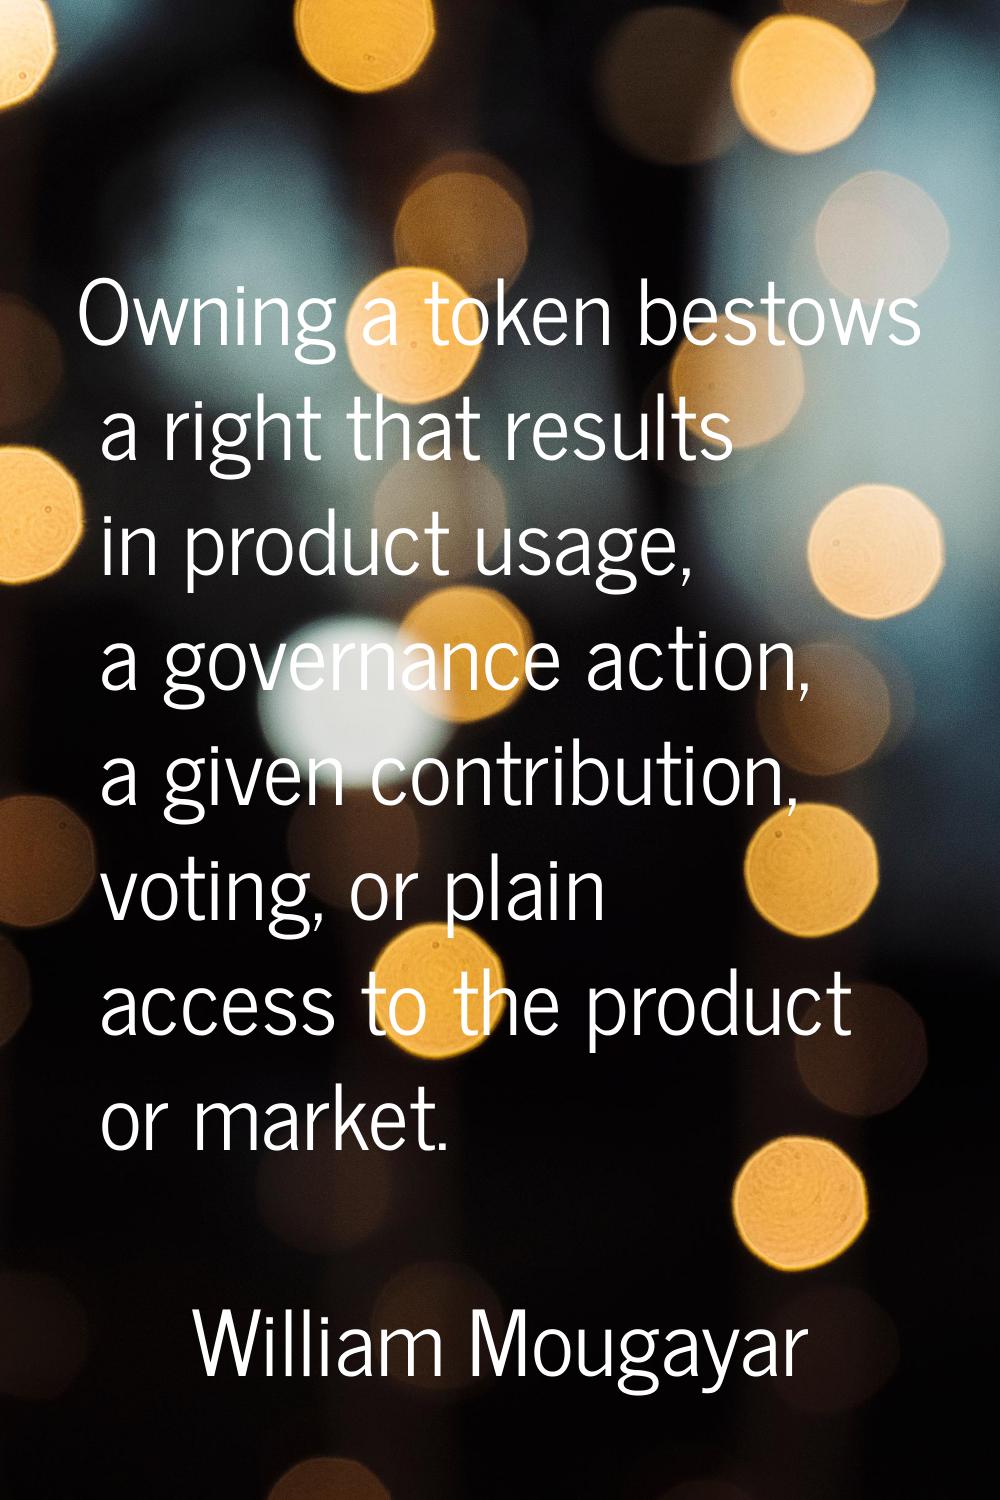 Owning a token bestows a right that results in product usage, a governance action, a given contribu